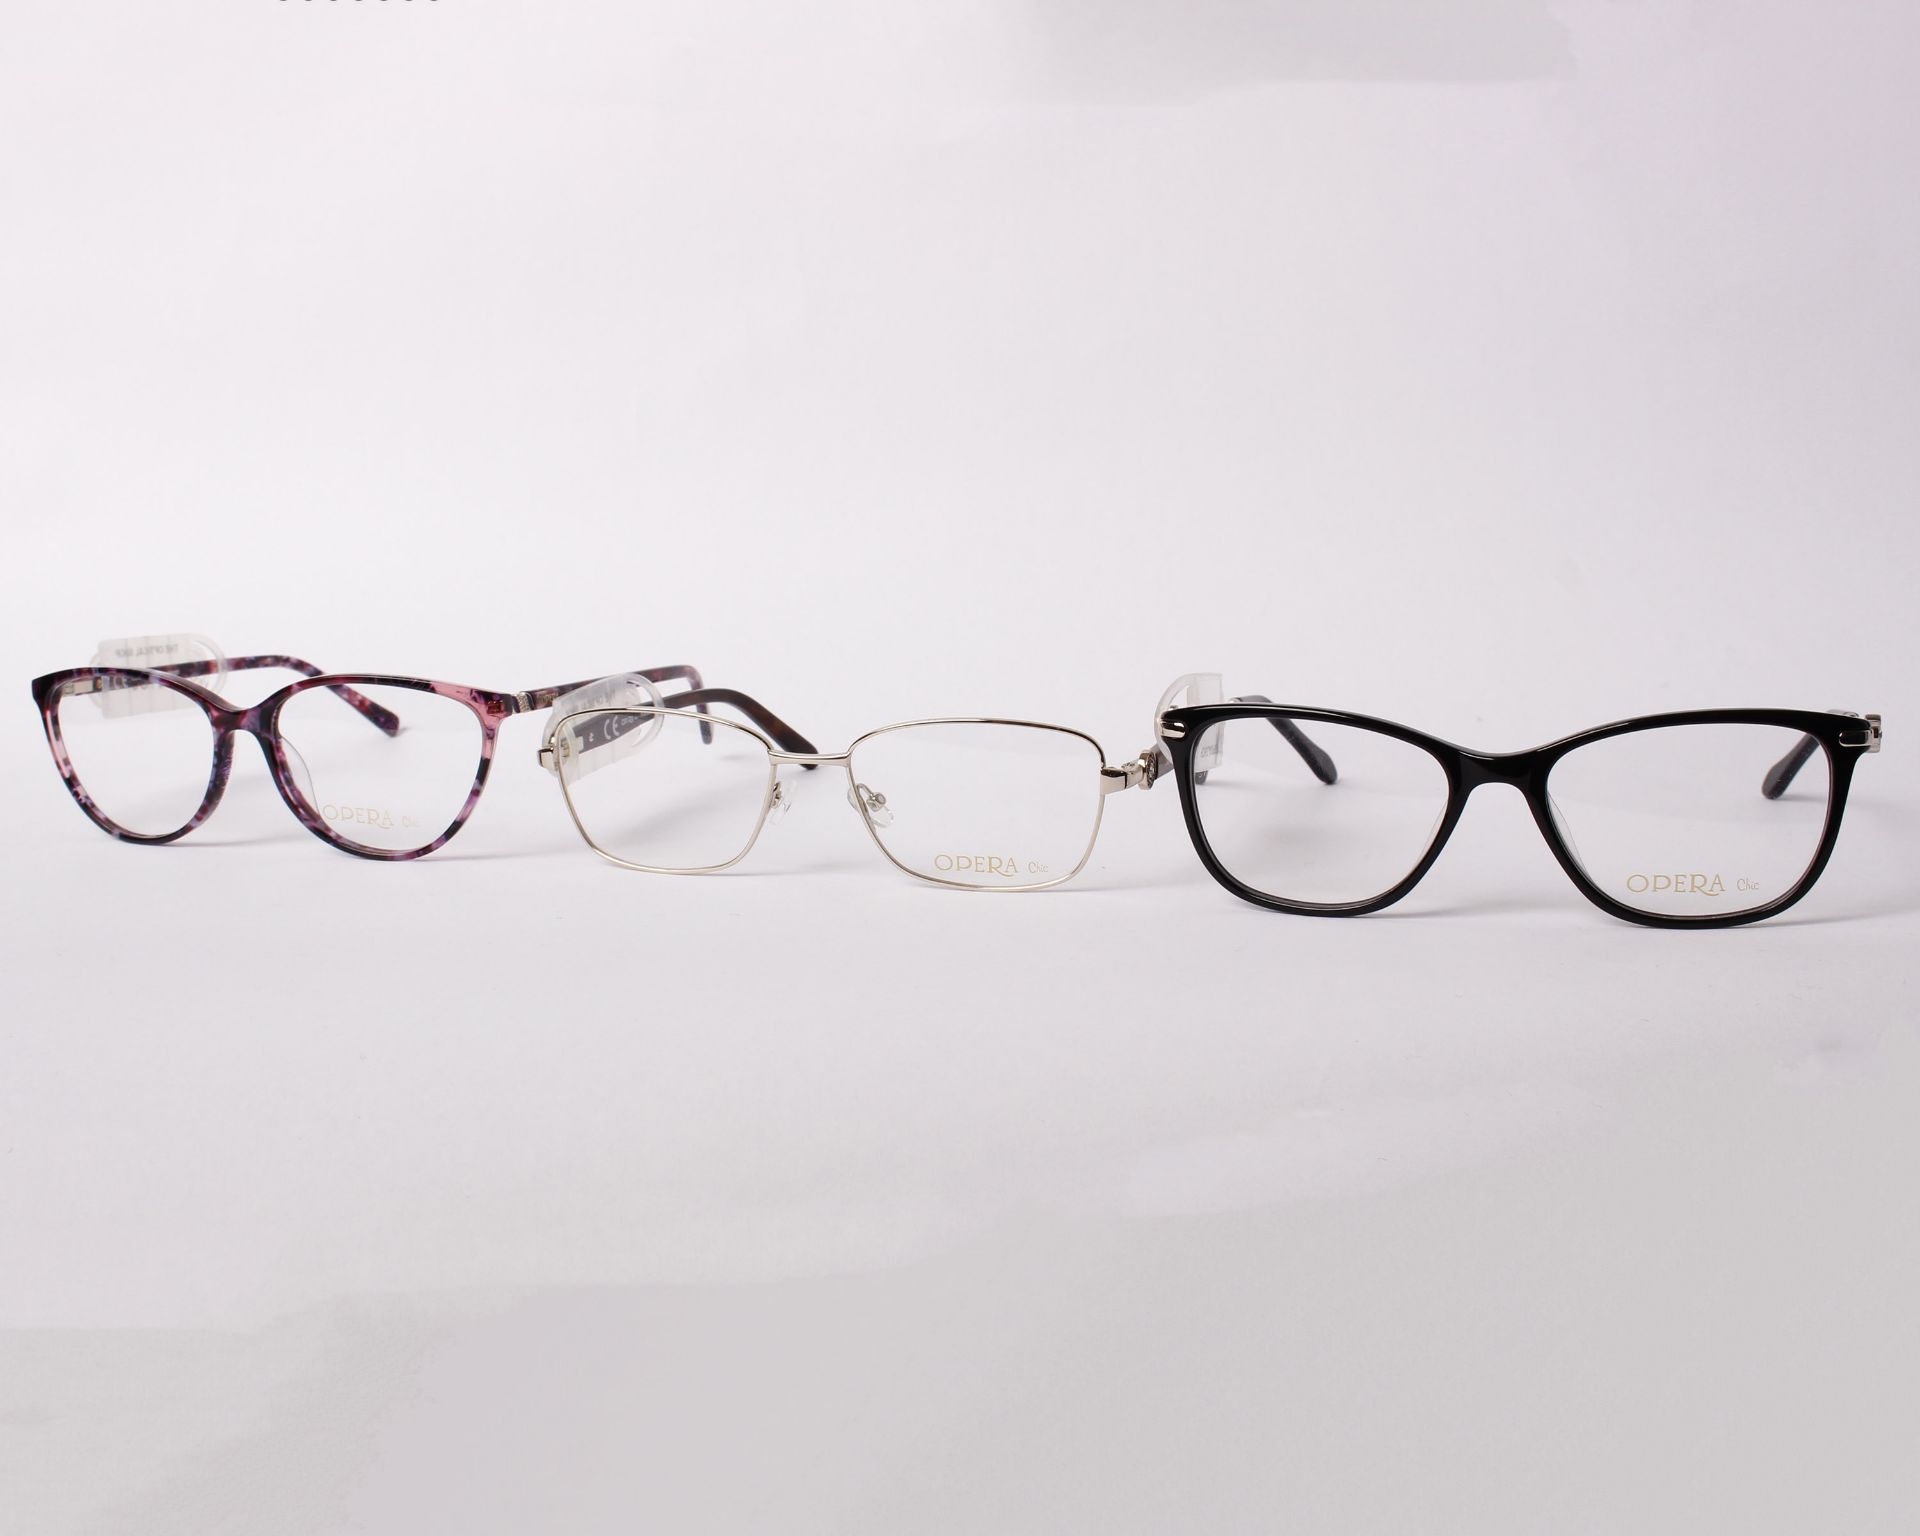 Three pairs of as new Opera glasses frames with clear glass (RRP £110 and £130).